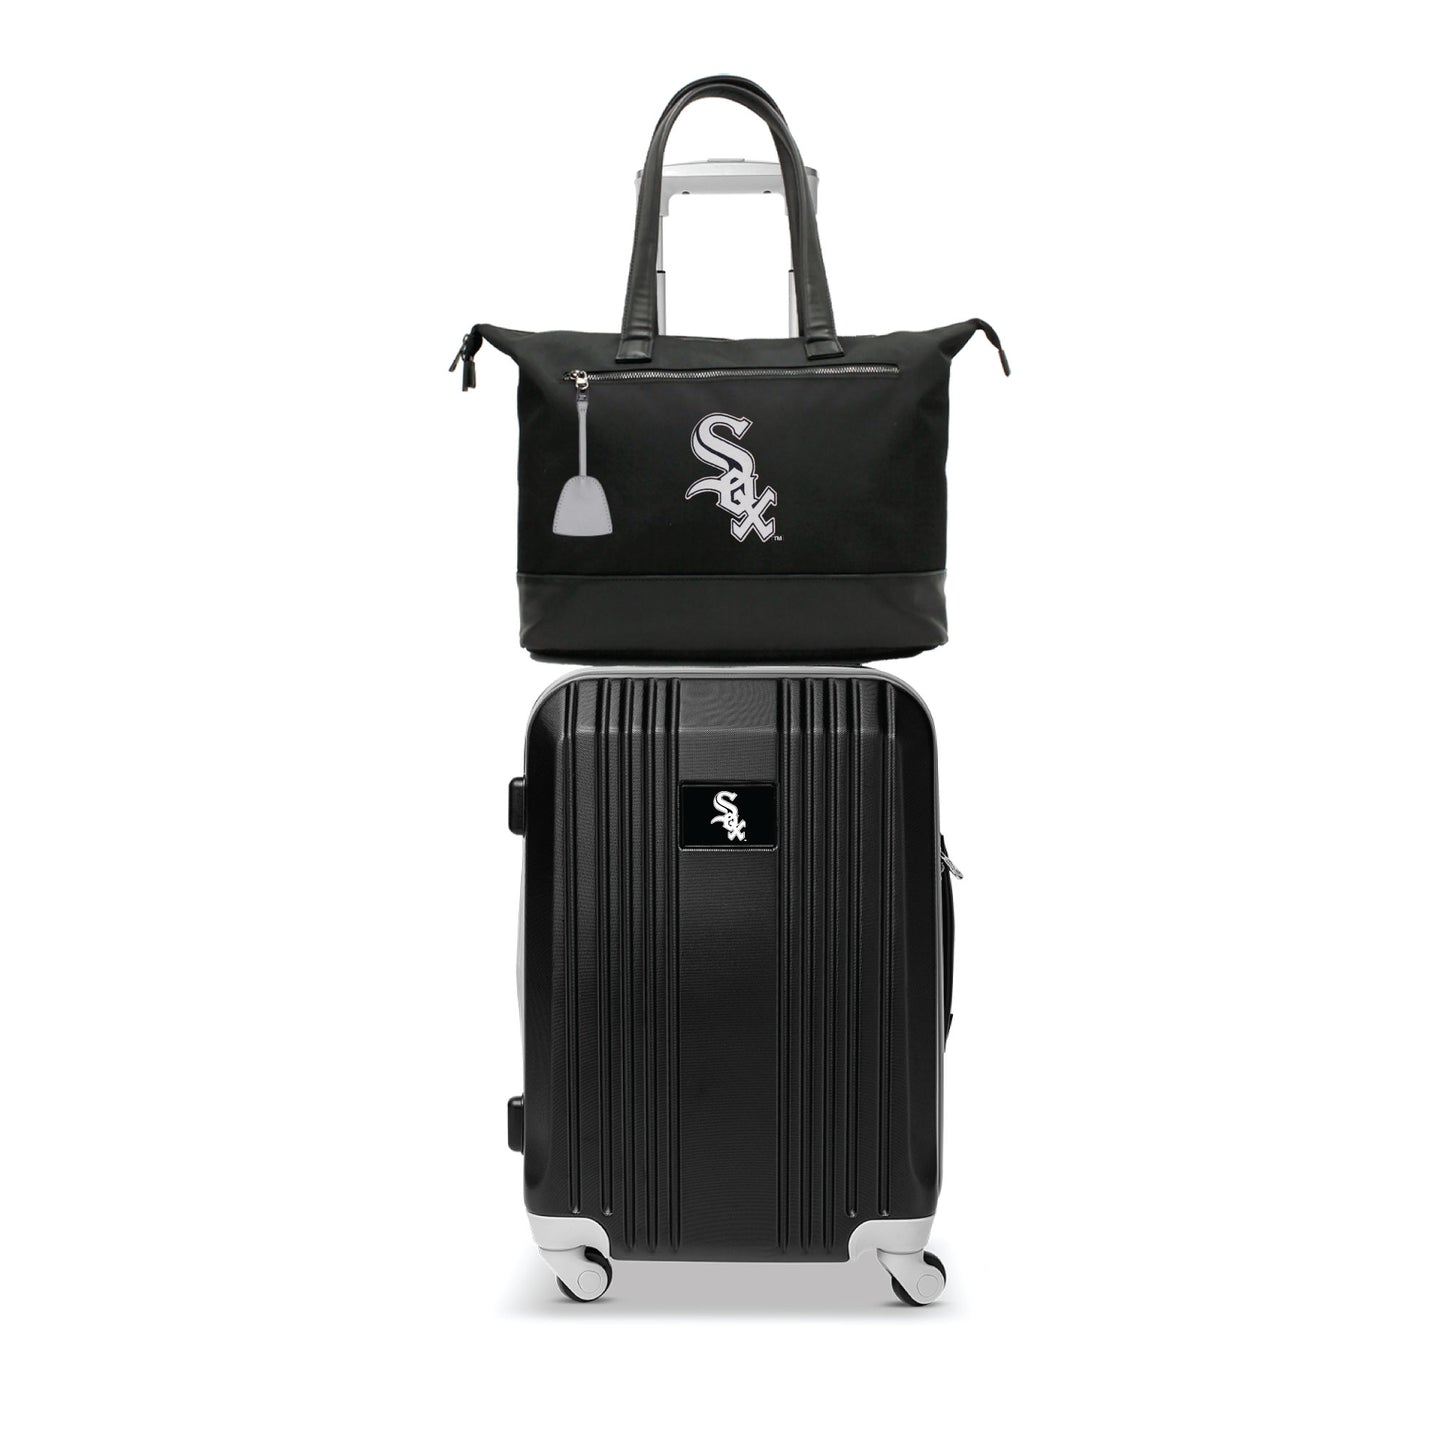 Chicago White Sox Premium Laptop Tote Bag and Luggage Set